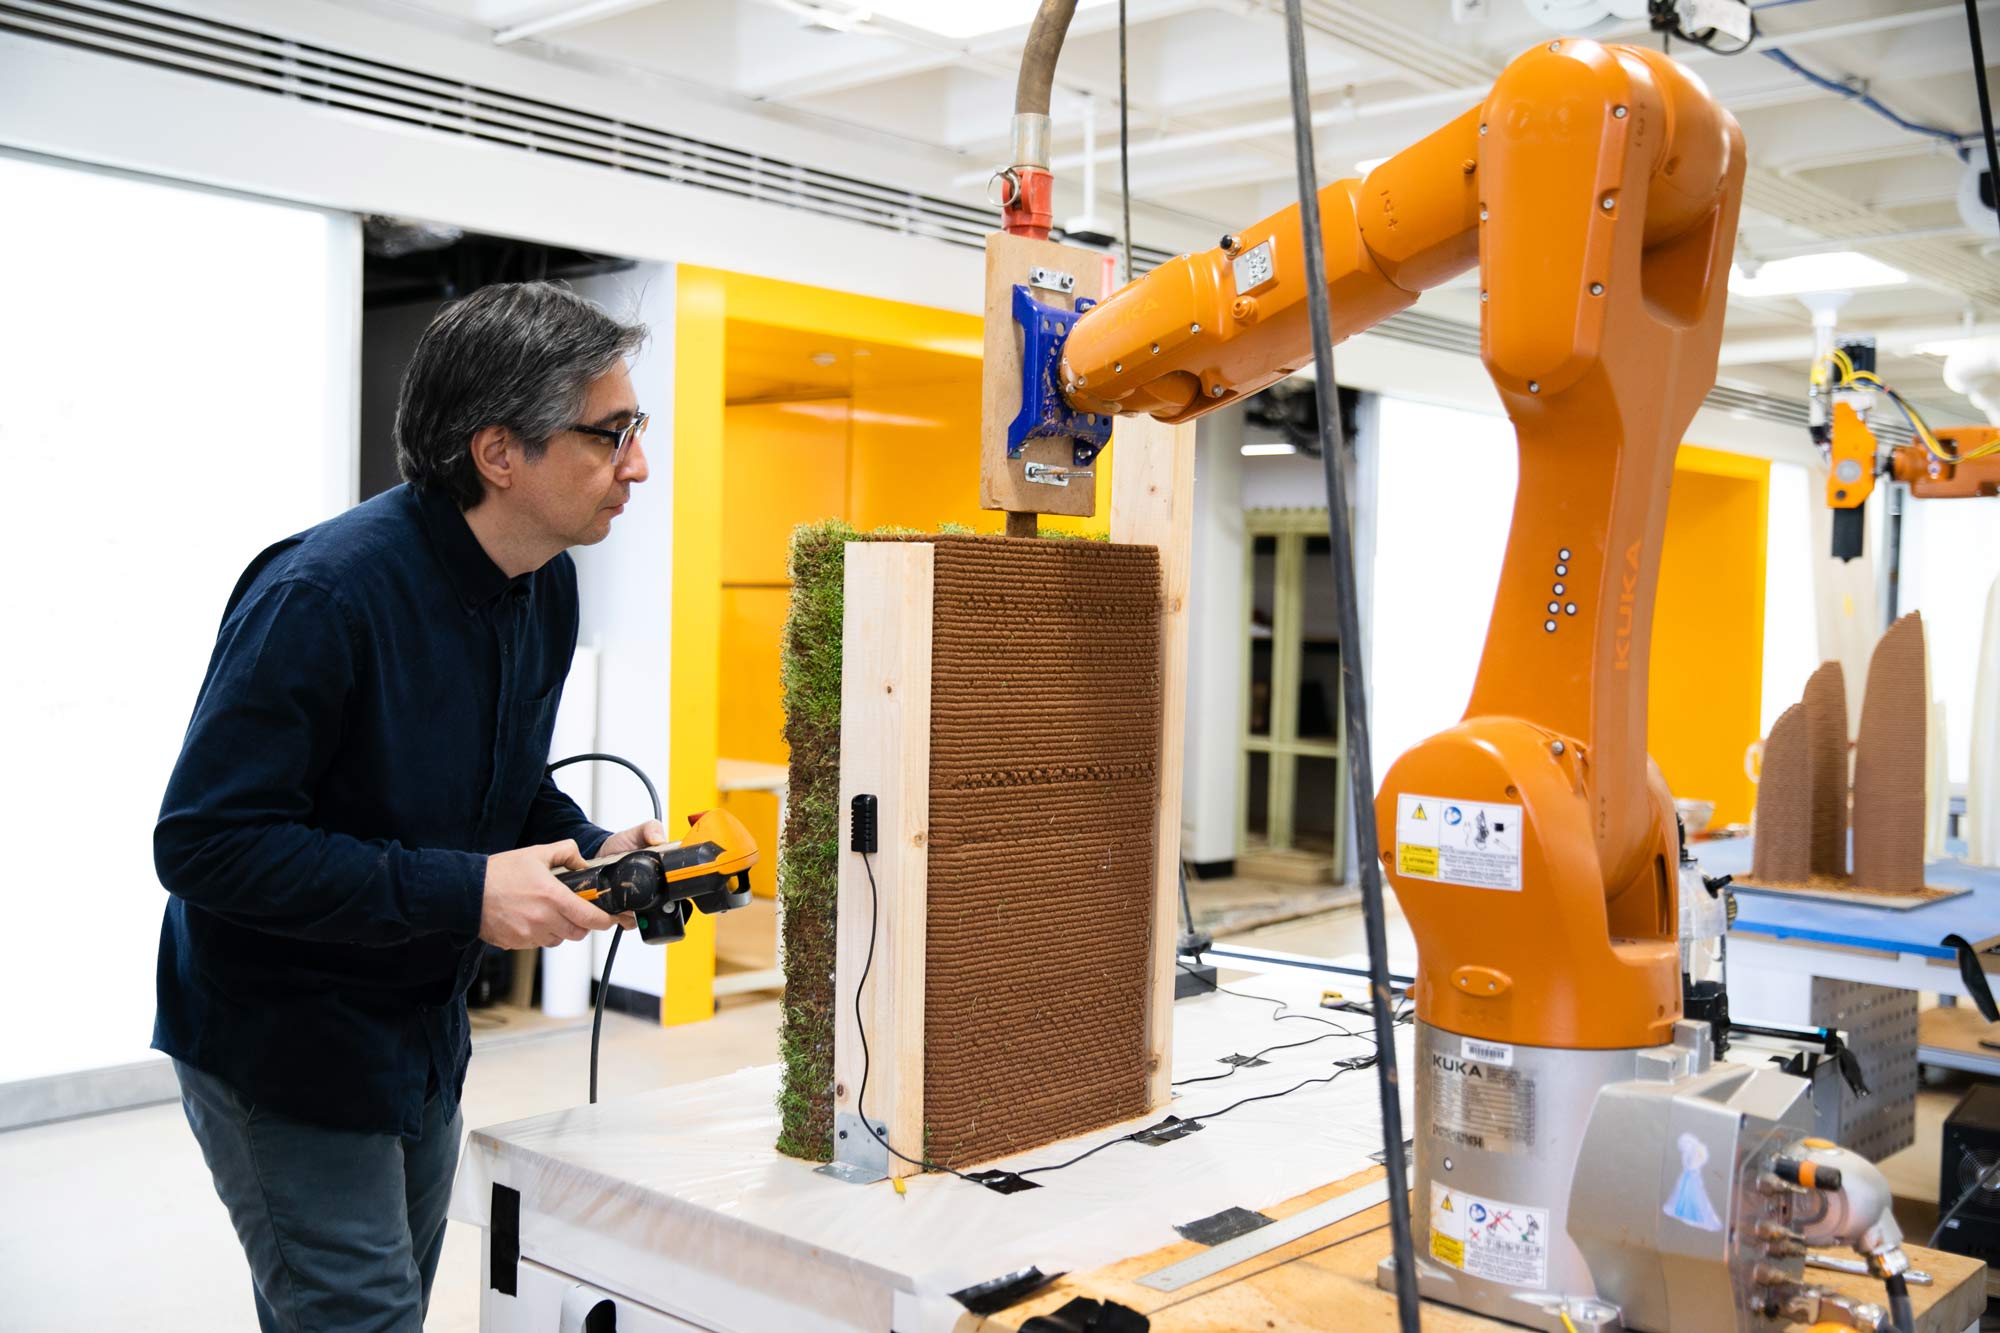 A man holds a controller and examines a robotic arm